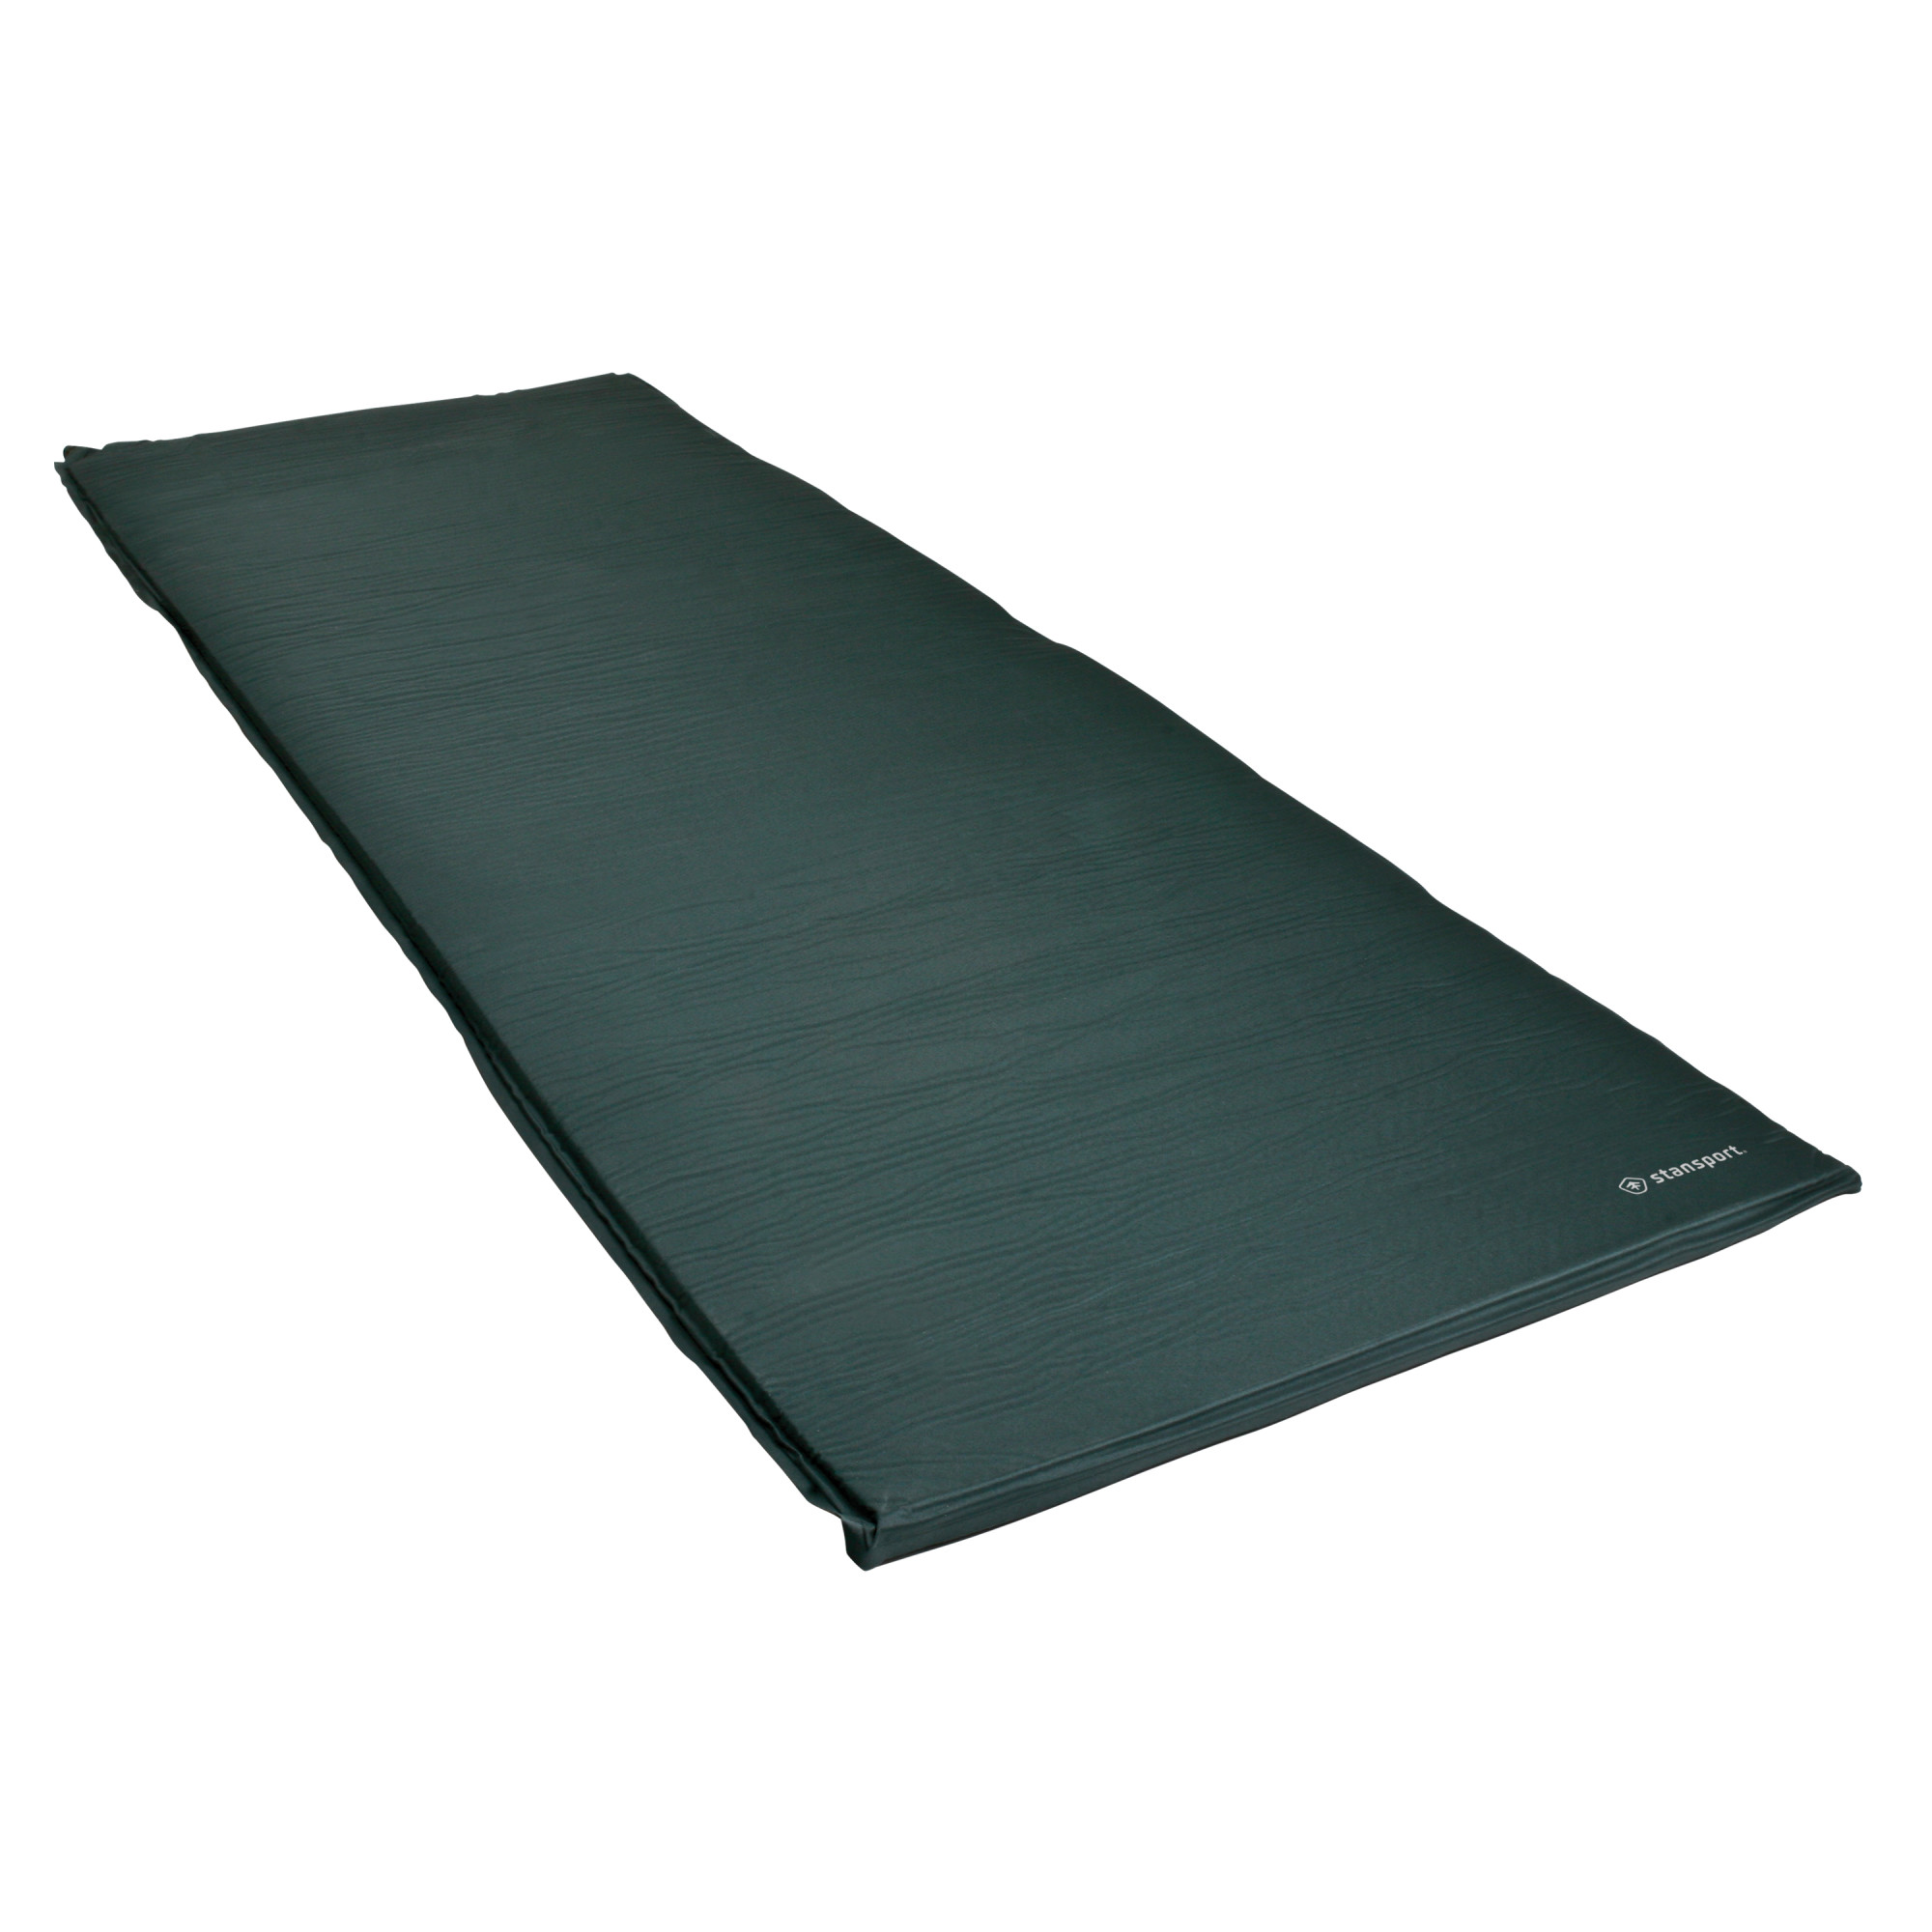 Stansport Self-Inflating Air Mat - image 1 of 7